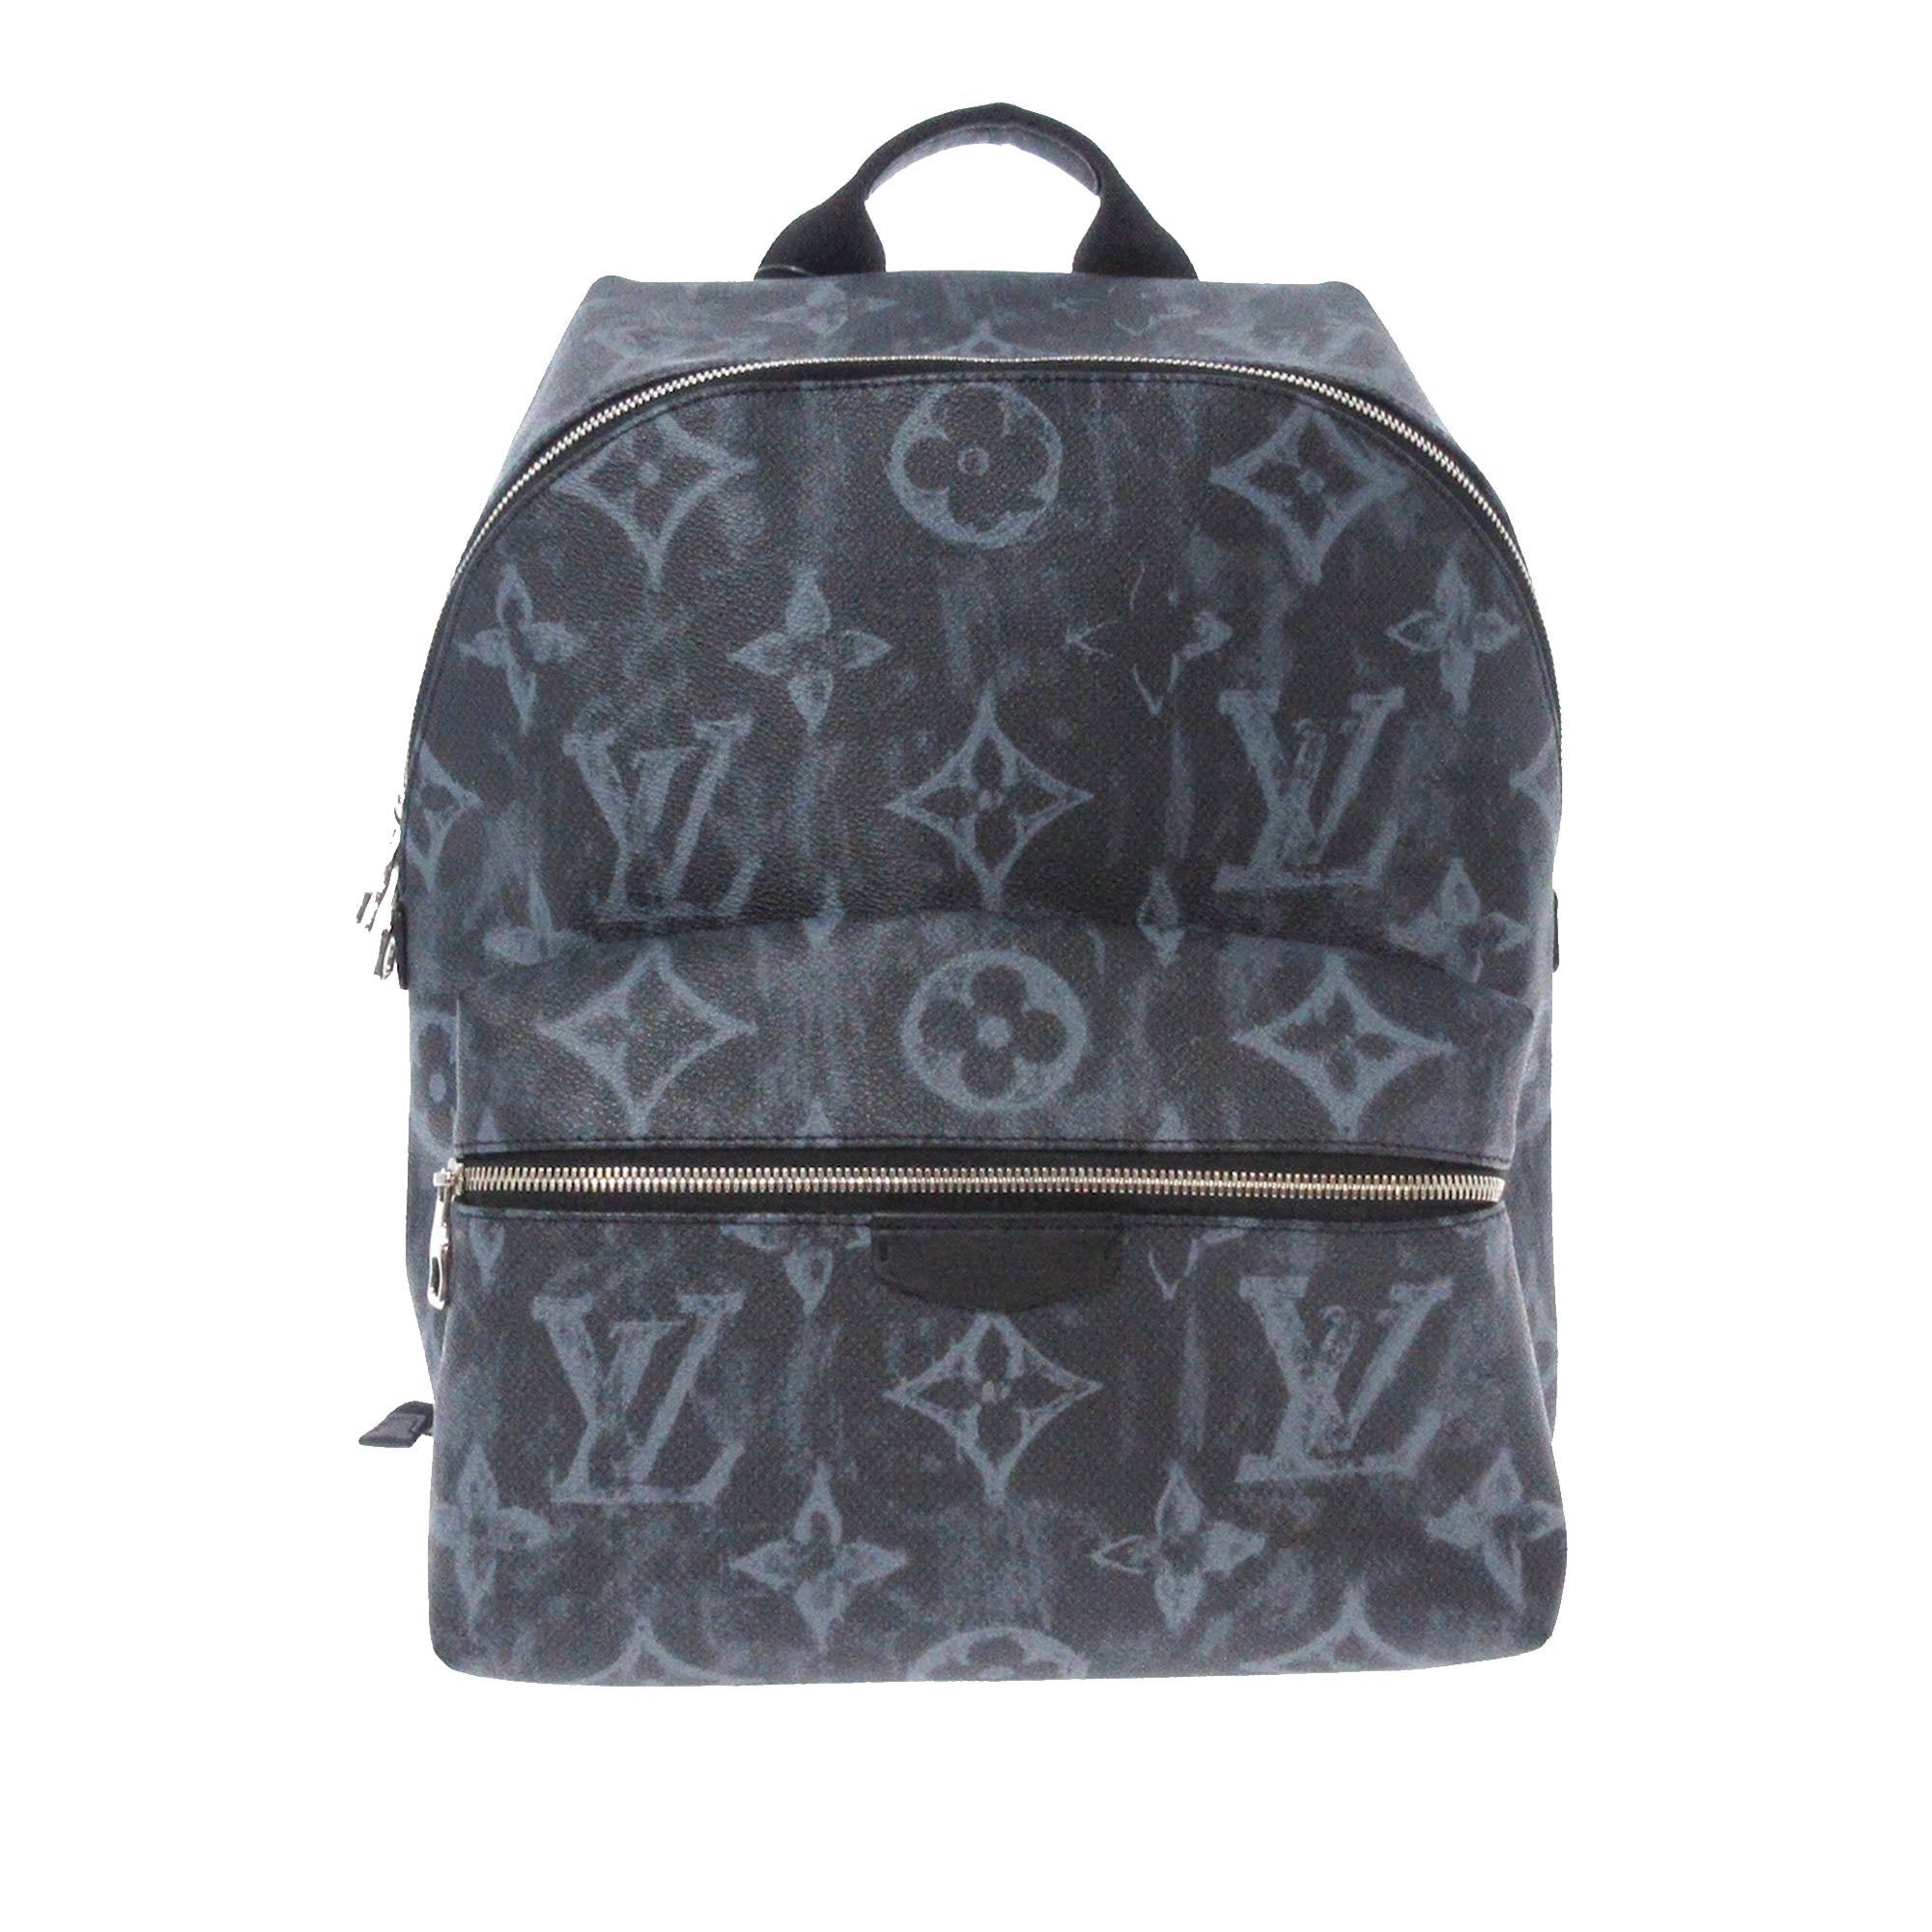 Louis Vuitton Discovery Backpack Monogram Eclipse PM Black in